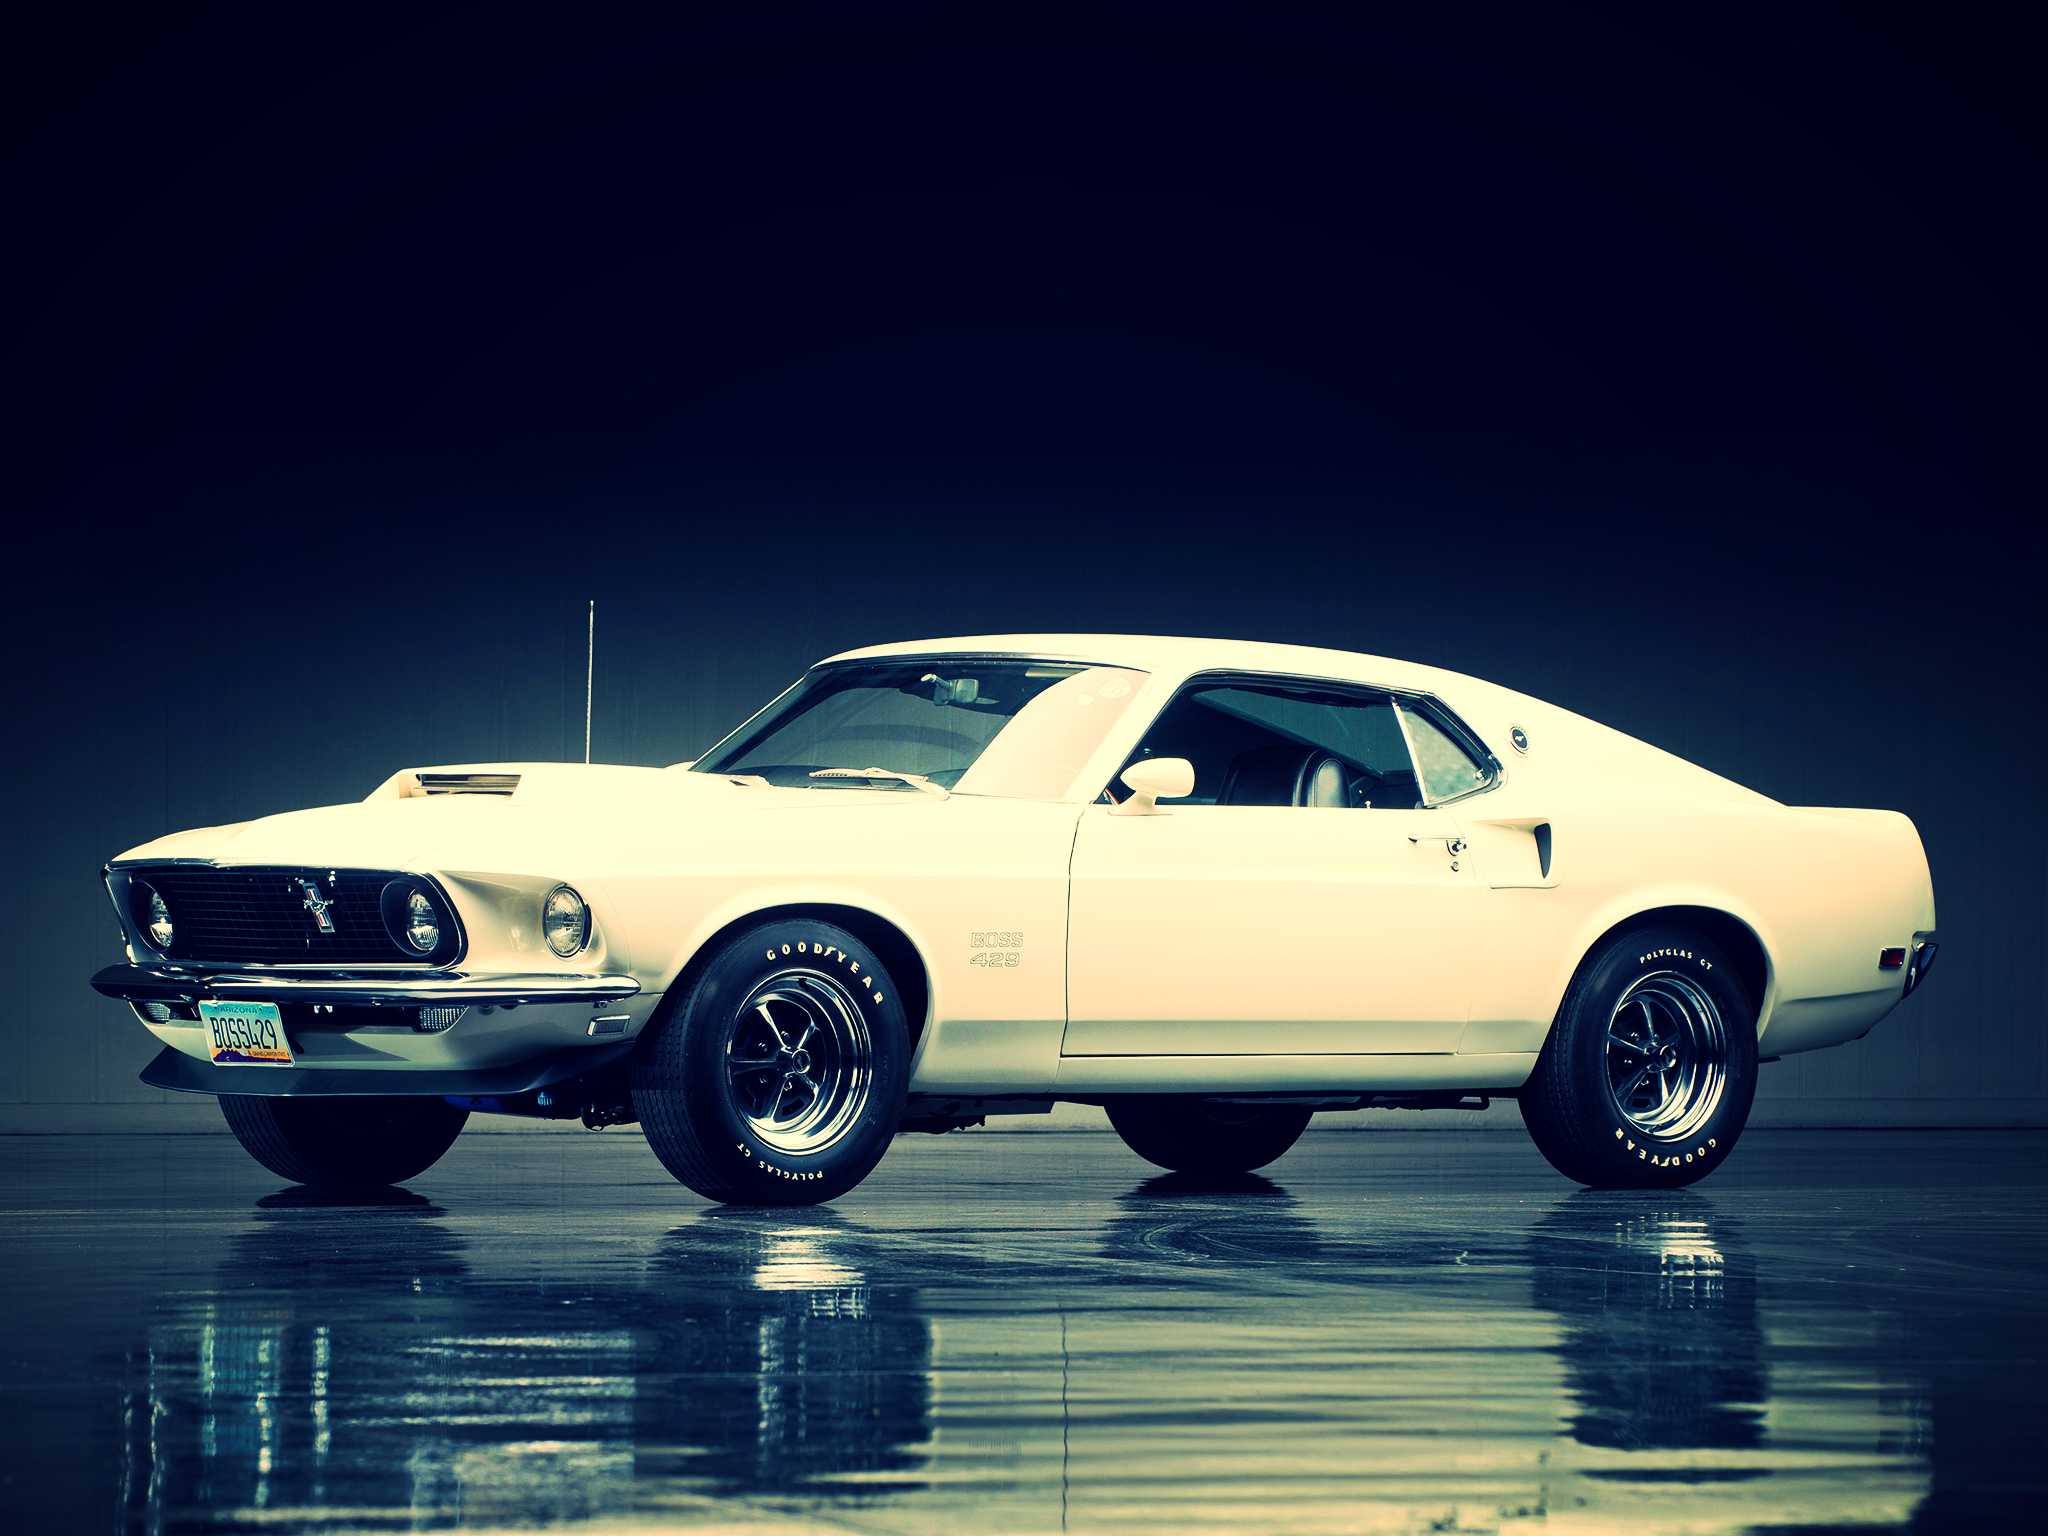 General 2048x1536 car Ford Ford Mustang muscle cars American cars white cars vehicle